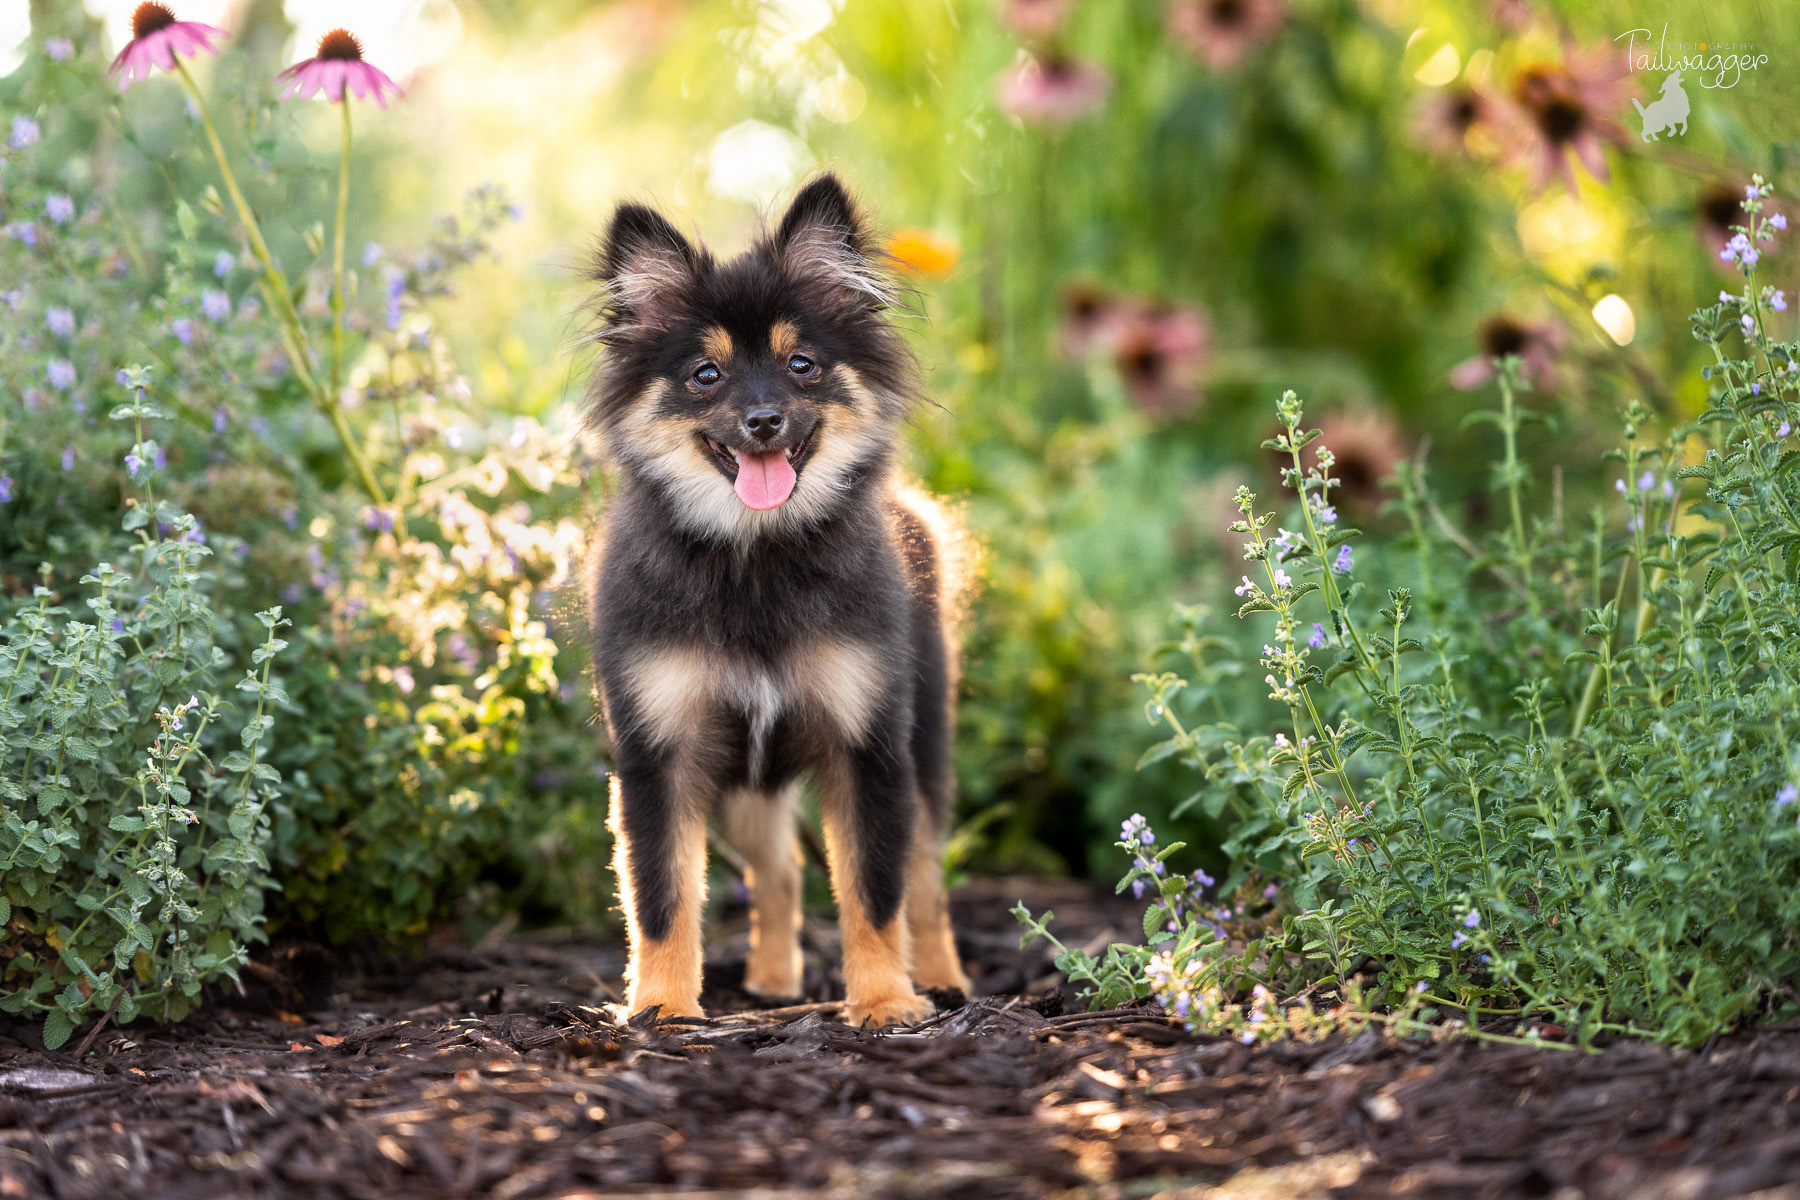 A Black and Tan Pomeranian stands in the middle of wild flowers near the Ford Museum in downtown Grand Rapids, Michigan.